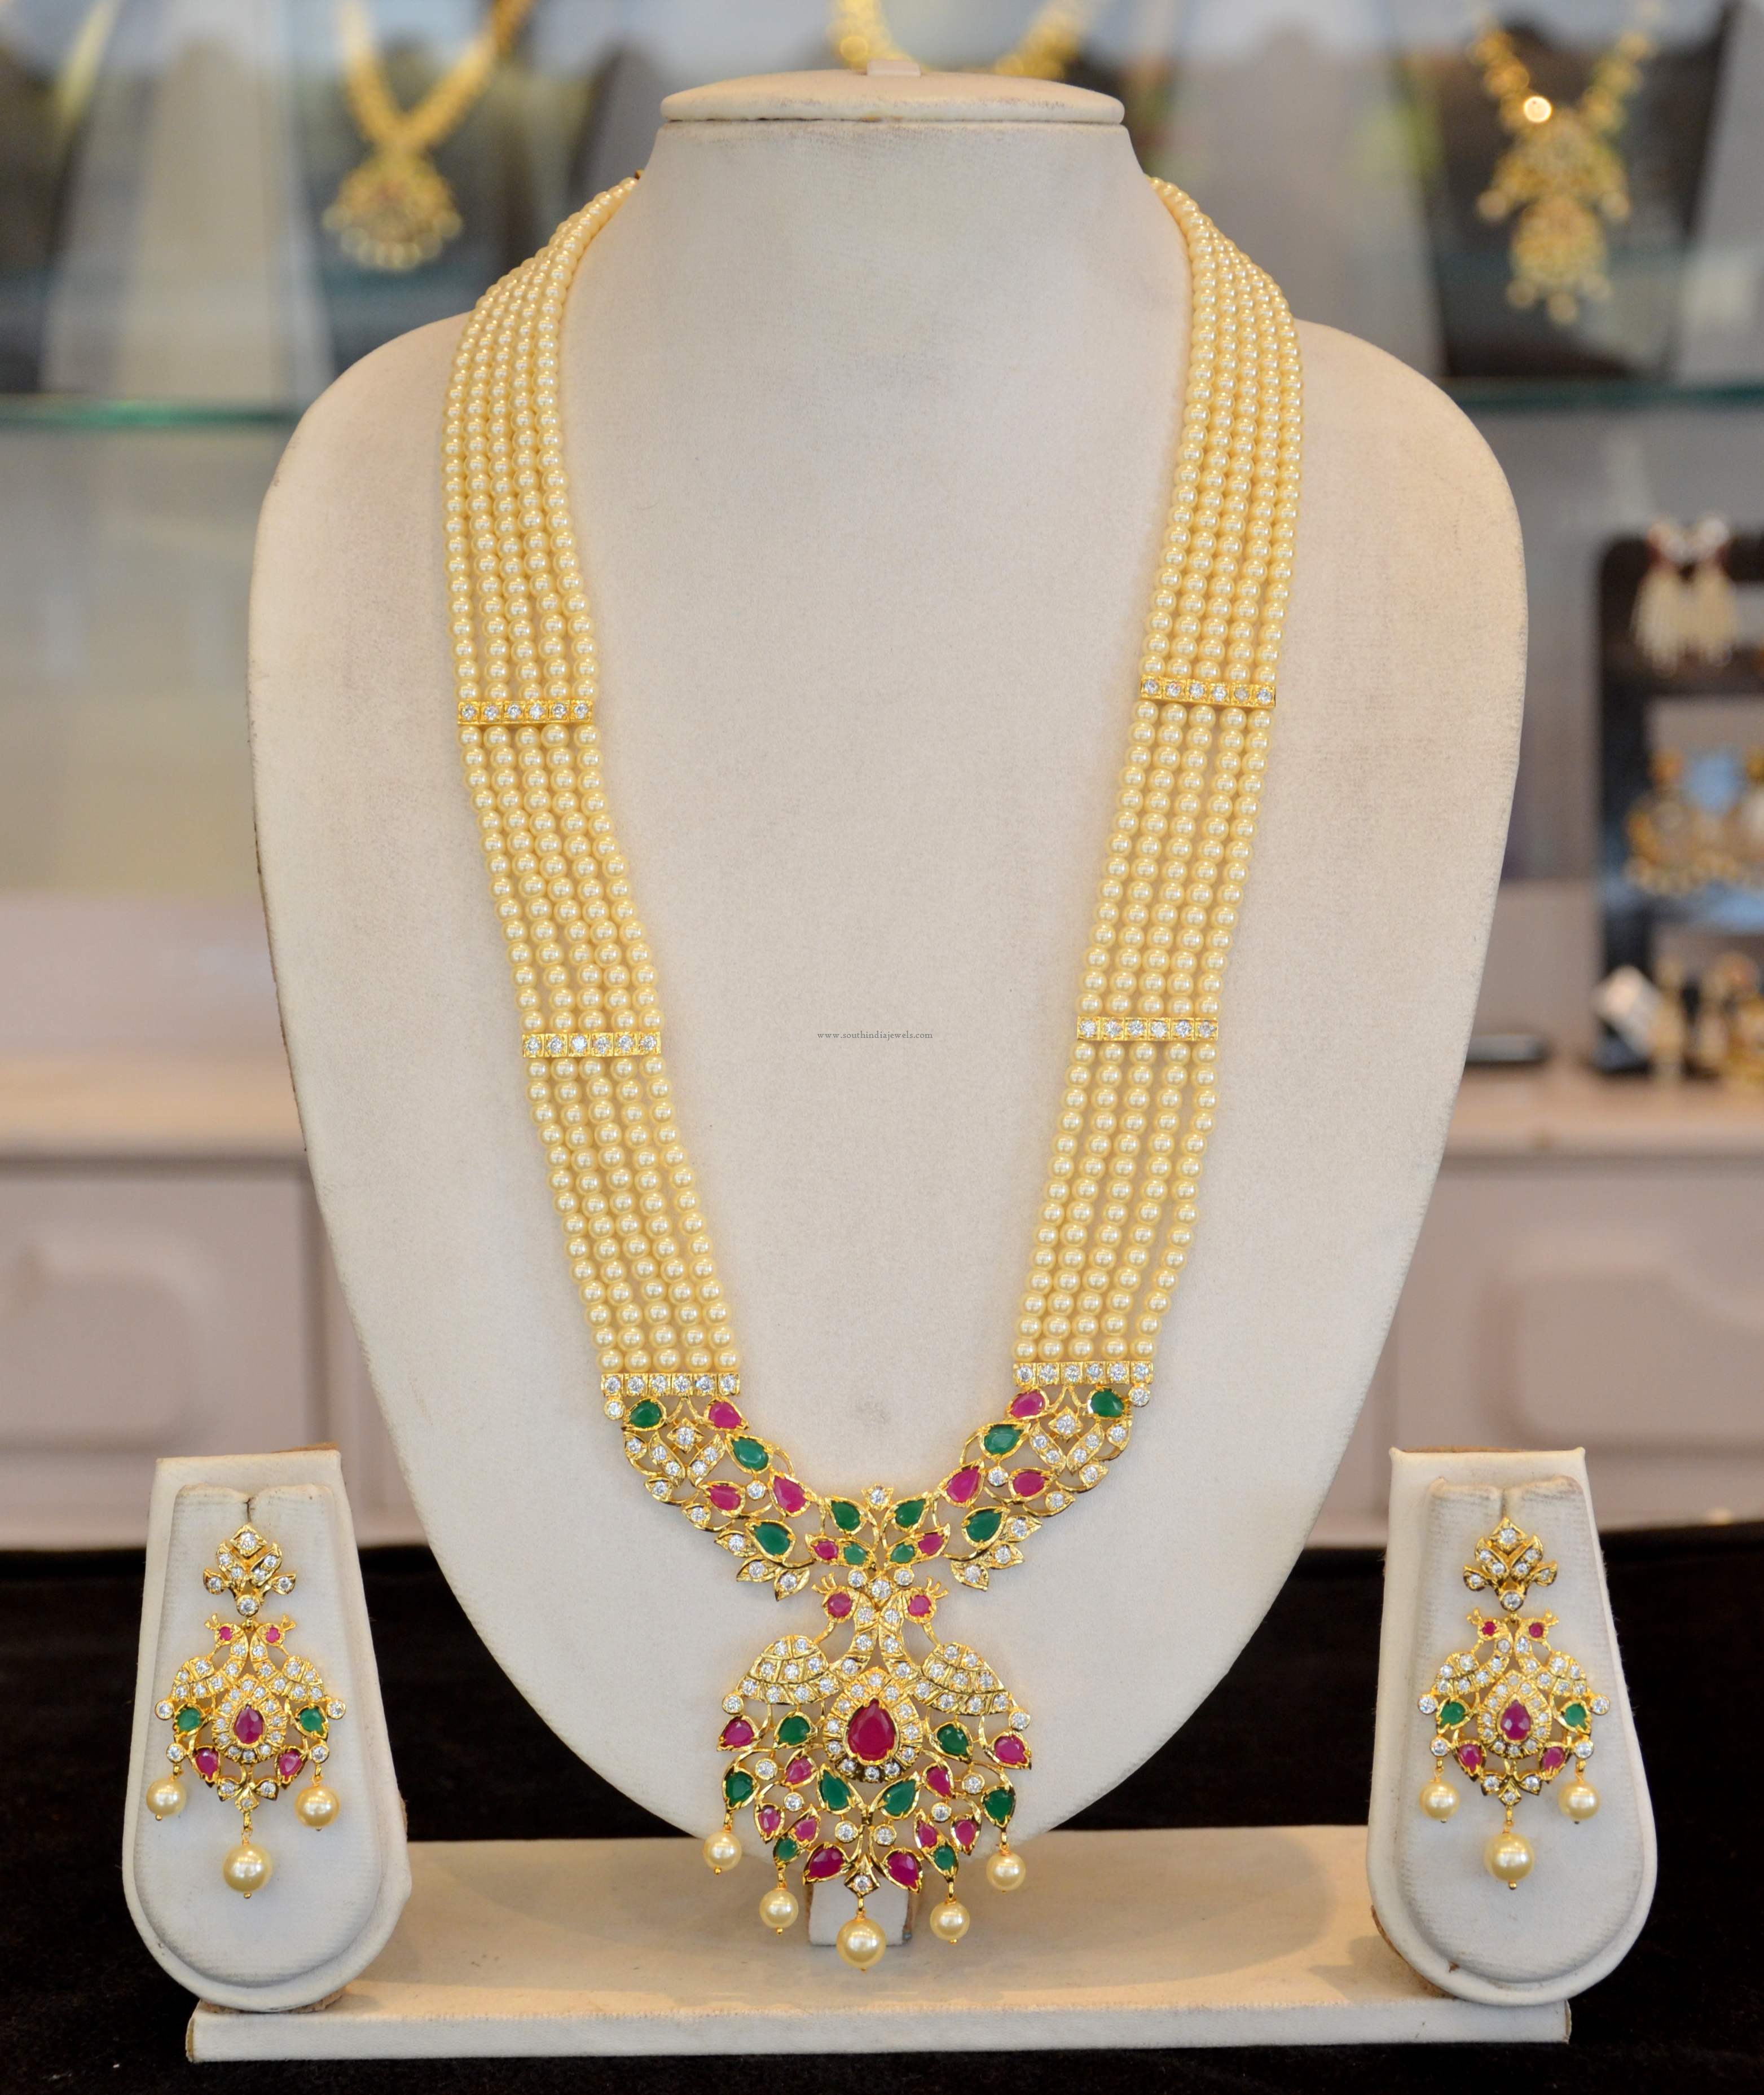 Details about   Indian Traditional 7 Line Long Pearl Haram With Pendant And Earrings Jewelry set 